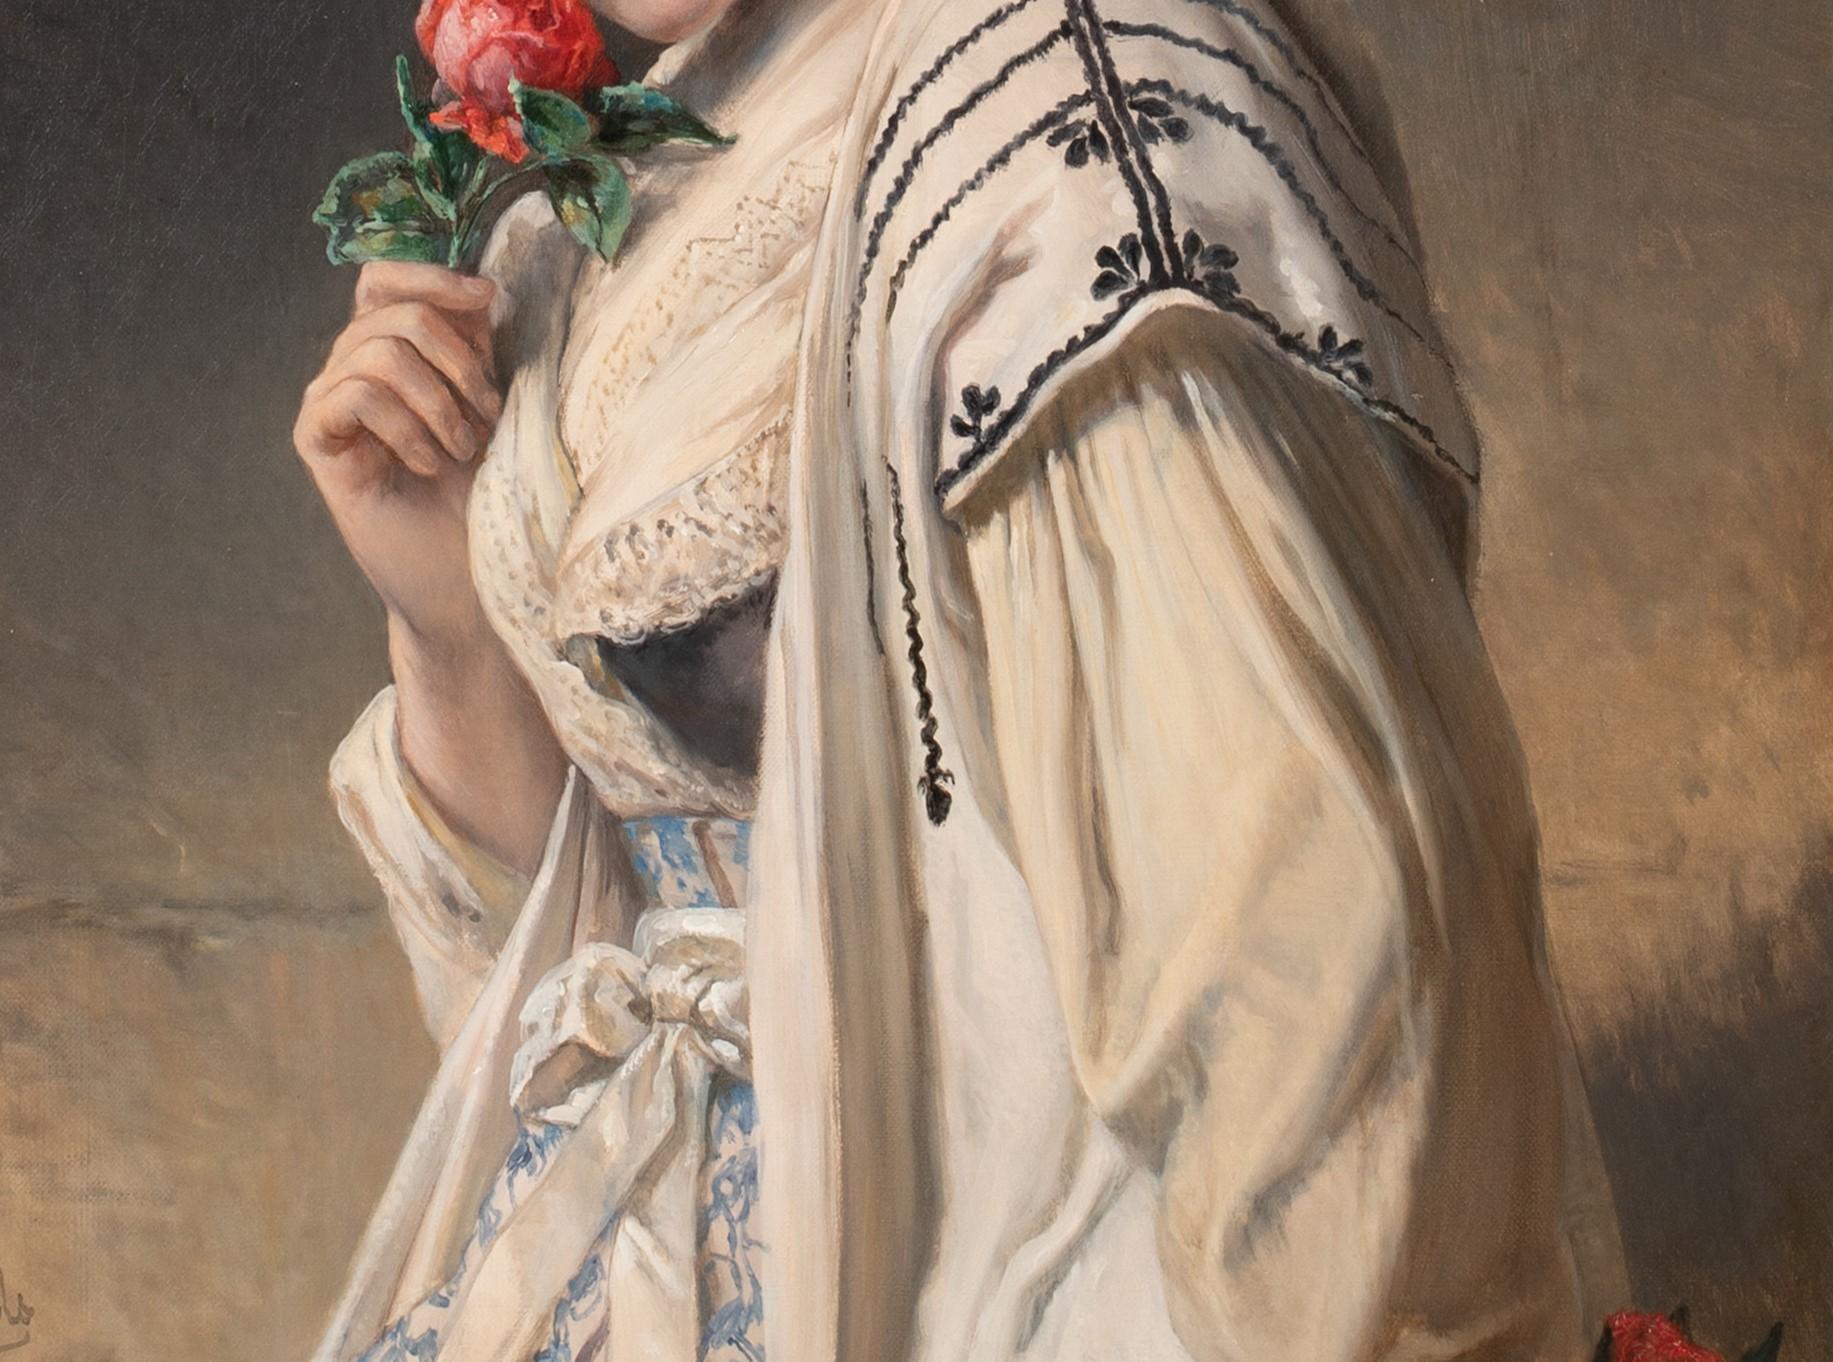 The Fragrance Of The Rose, 19th century

by Jean Francois Portaels, (1818-1895)

Large 19th Century French portrait of lady in Tangiers provincial attire holding a rose, oil on canvas by Jean Francois Portaels. Large scale example the leading